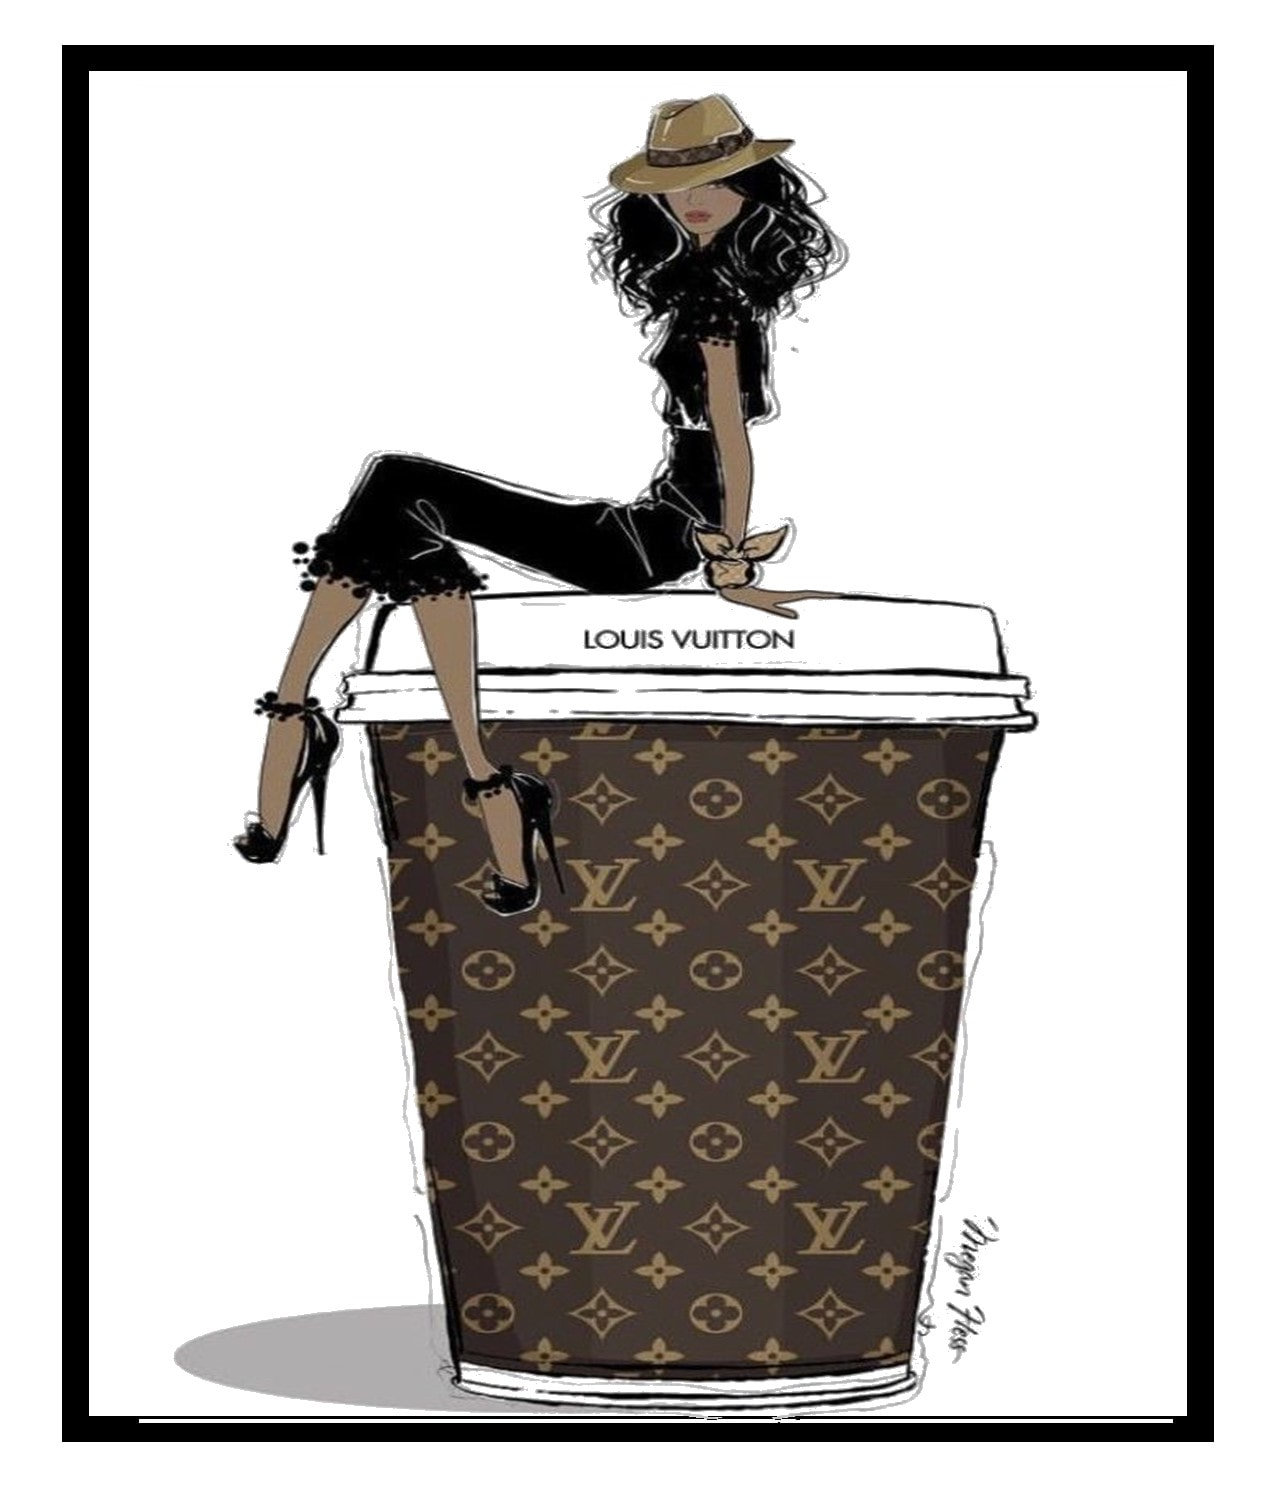 Louis Vuitton Coffee Cup Fashionista inspired 5x7 Poster or Sign